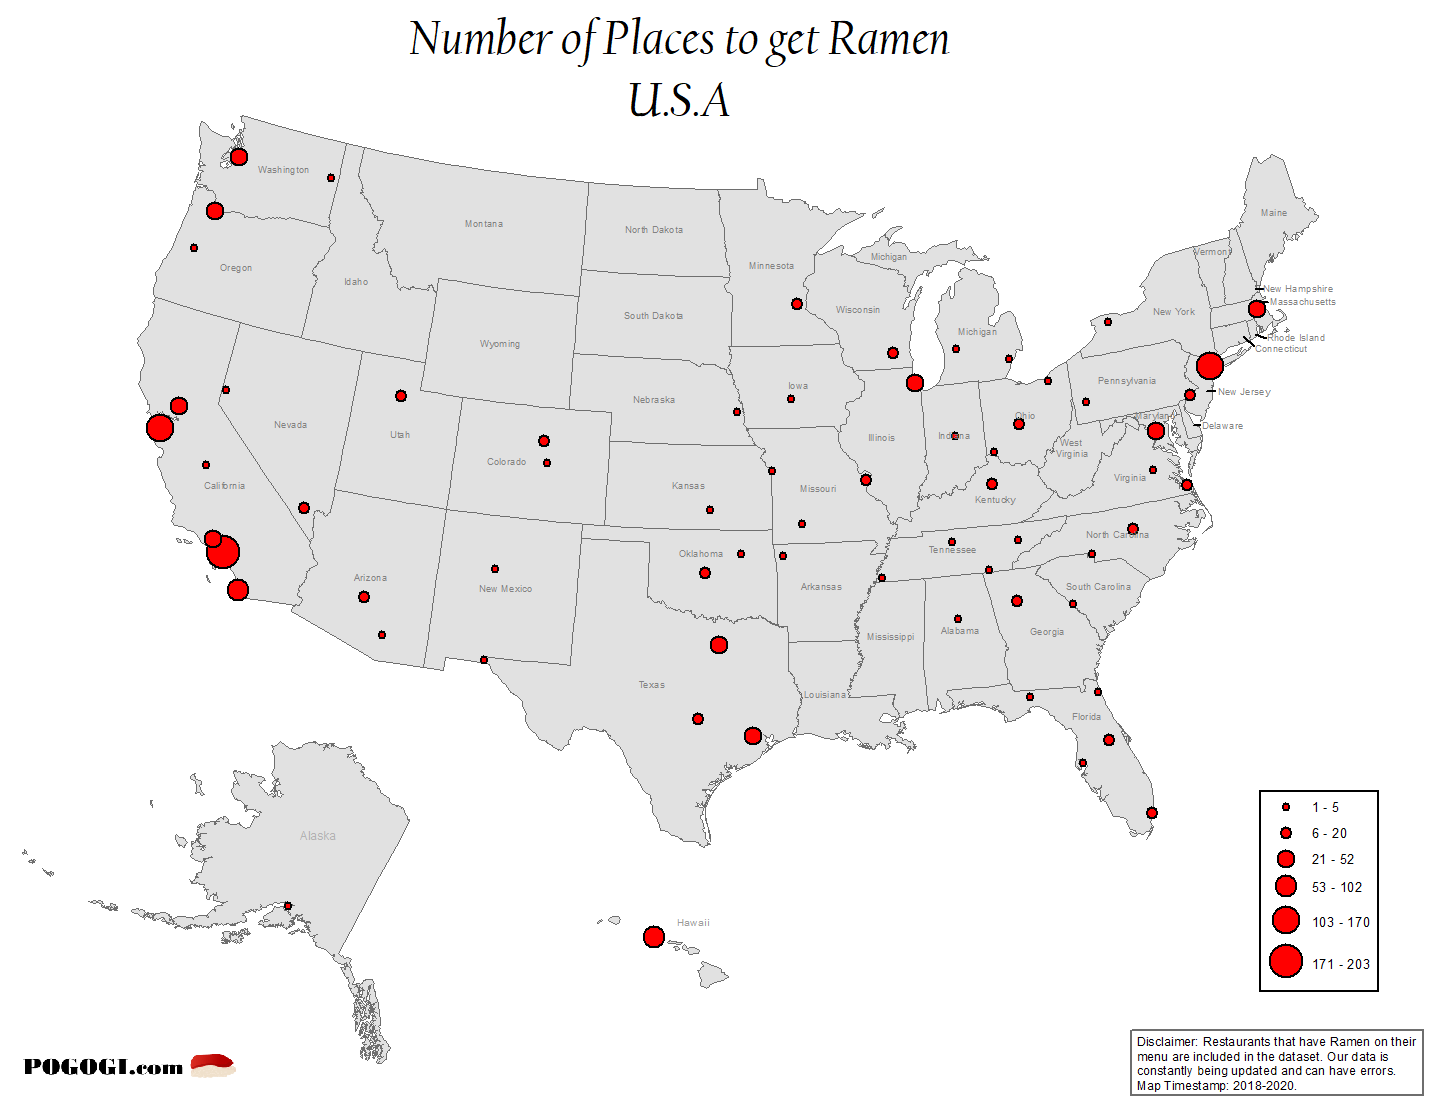 USA Map showing the number of places that serve Ramen